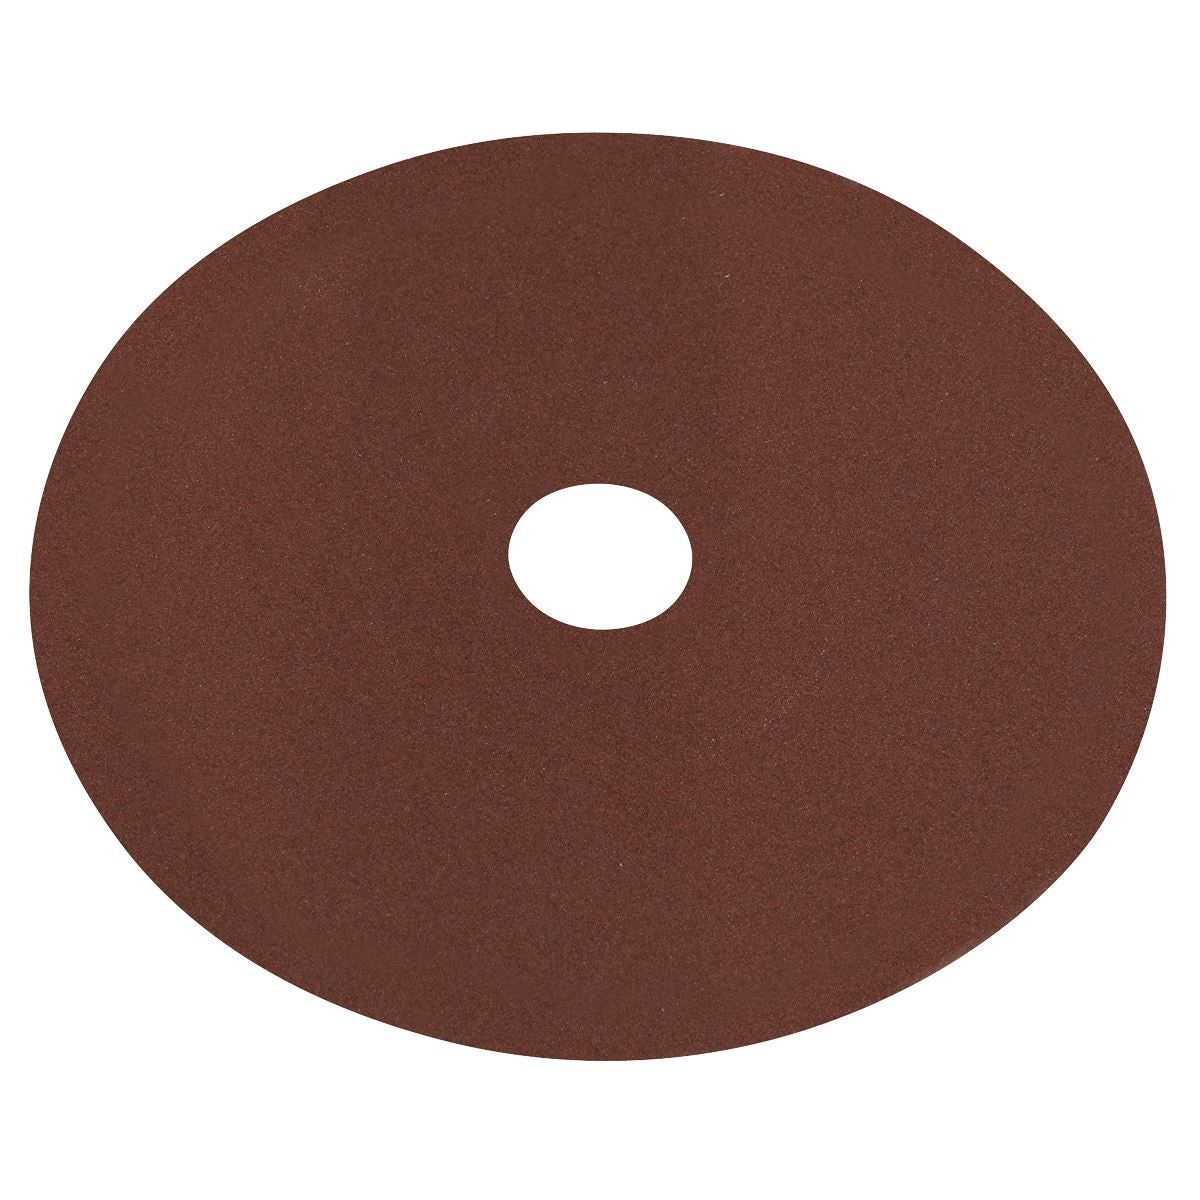 Worksafe by Sealey Fibre Backed Disc Ø115mm - 120Grit Pack of 25